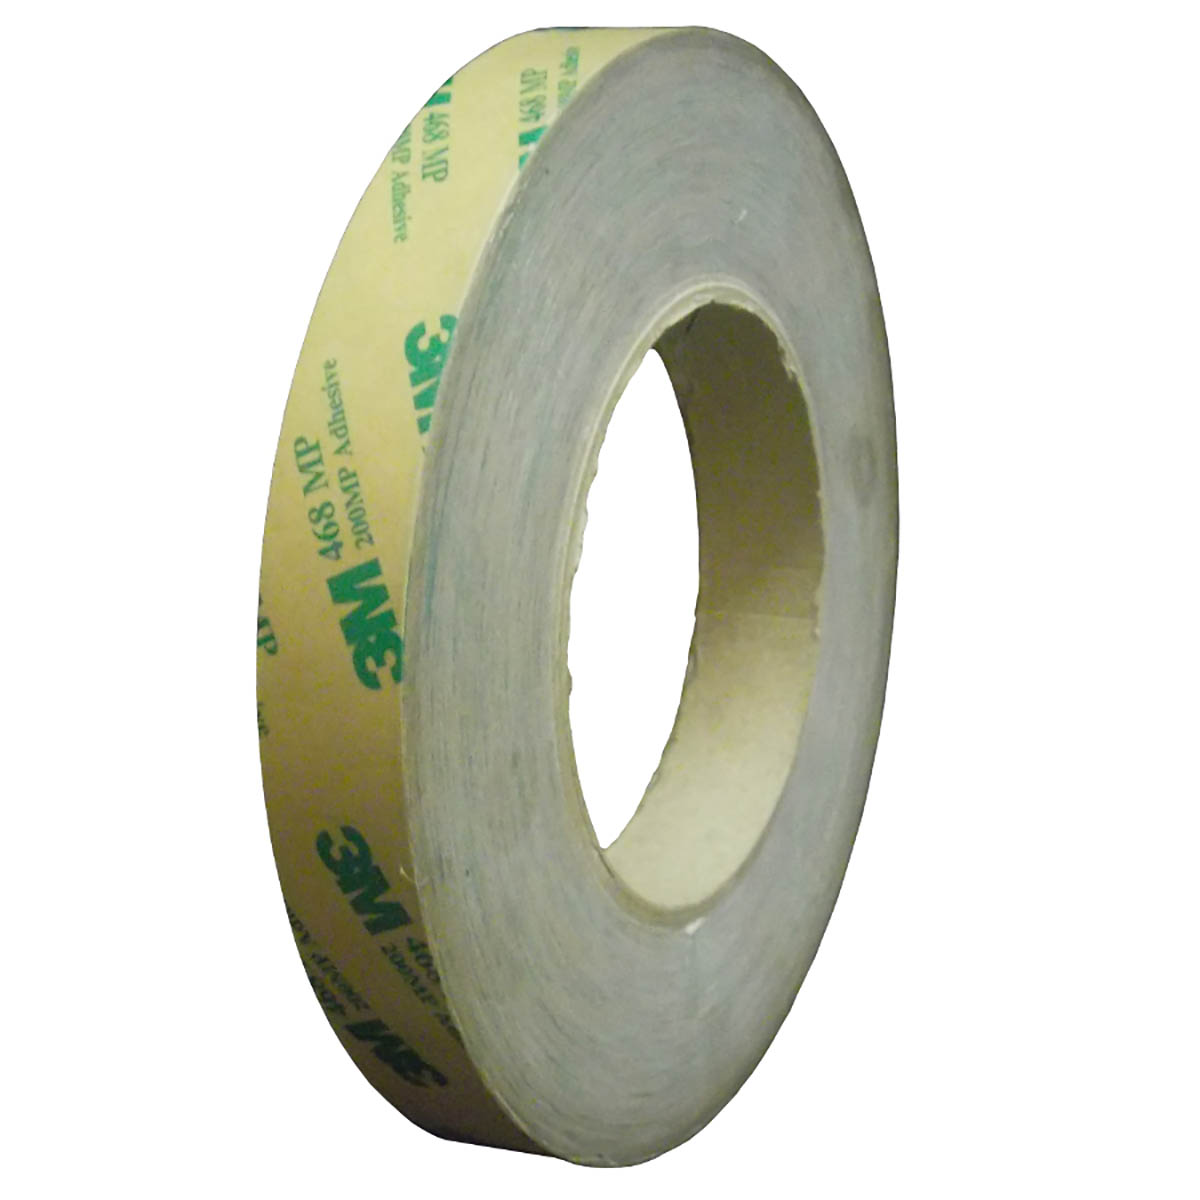 Slit roll of 3M 468MP Double Sided Adhesive Tape